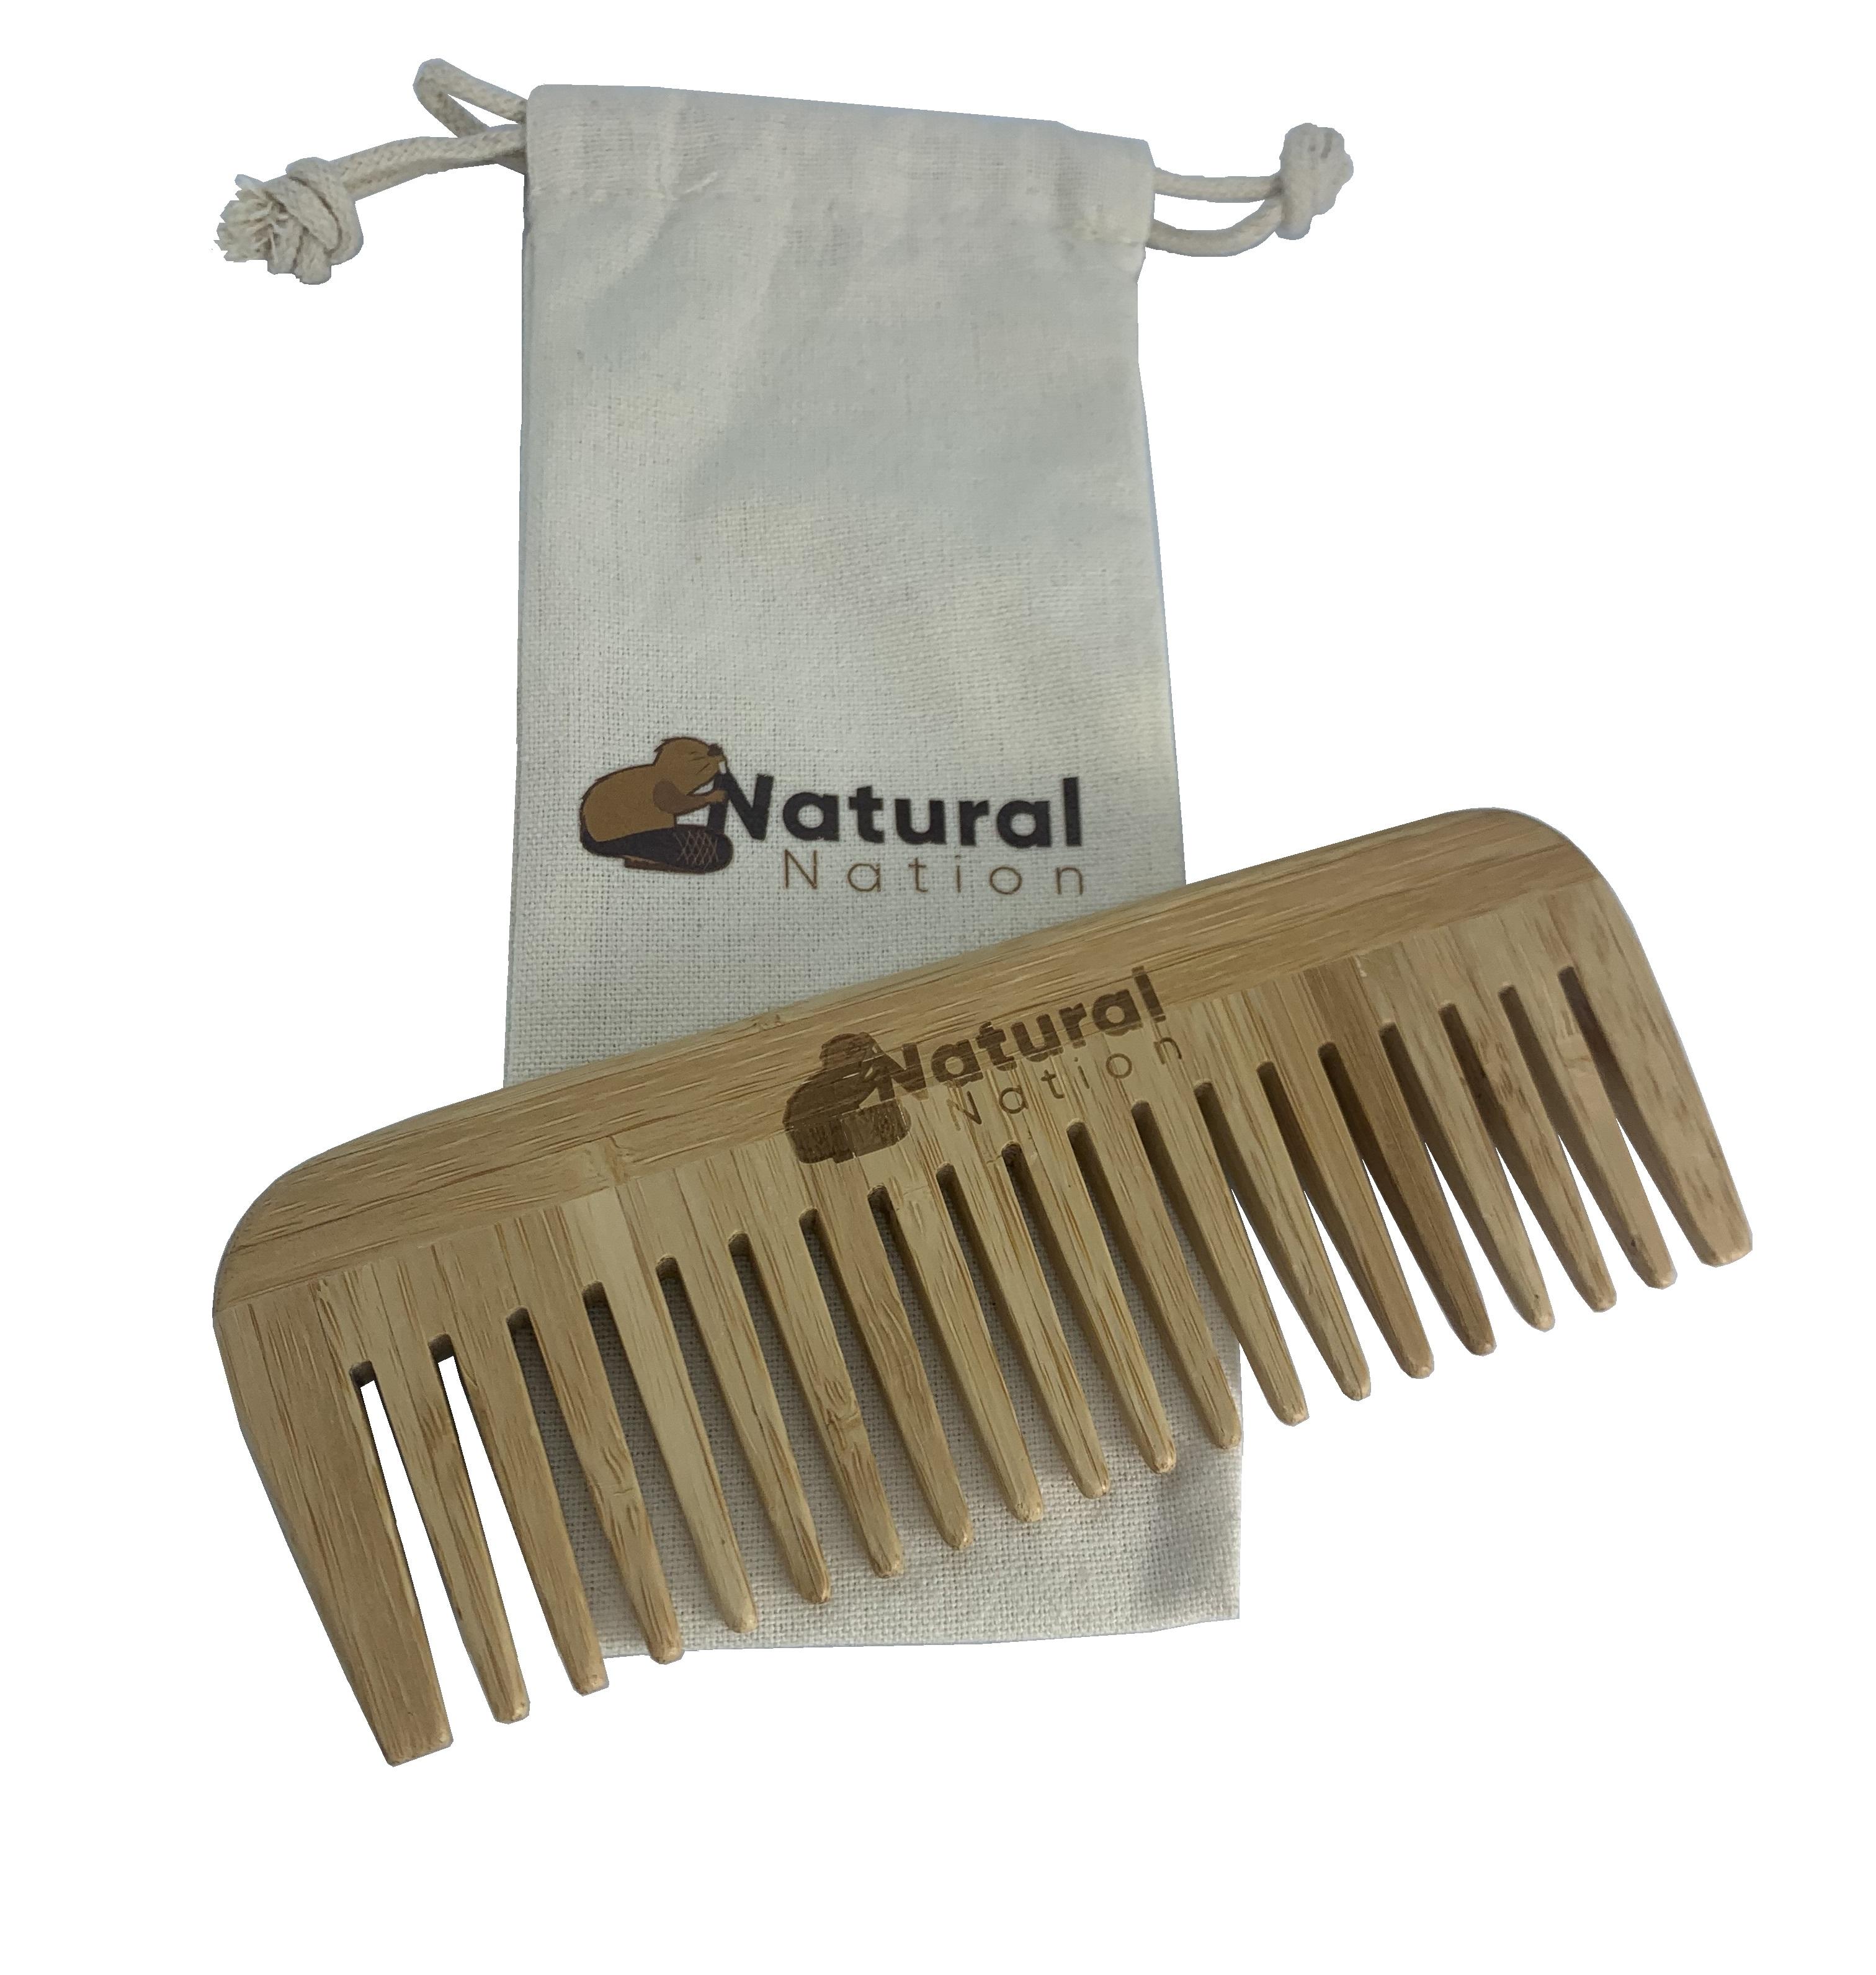 Eco Bamboo Hair Comb With Cotton Bag 20 Wooden Teeth  x 6cm  Eco-Friendly